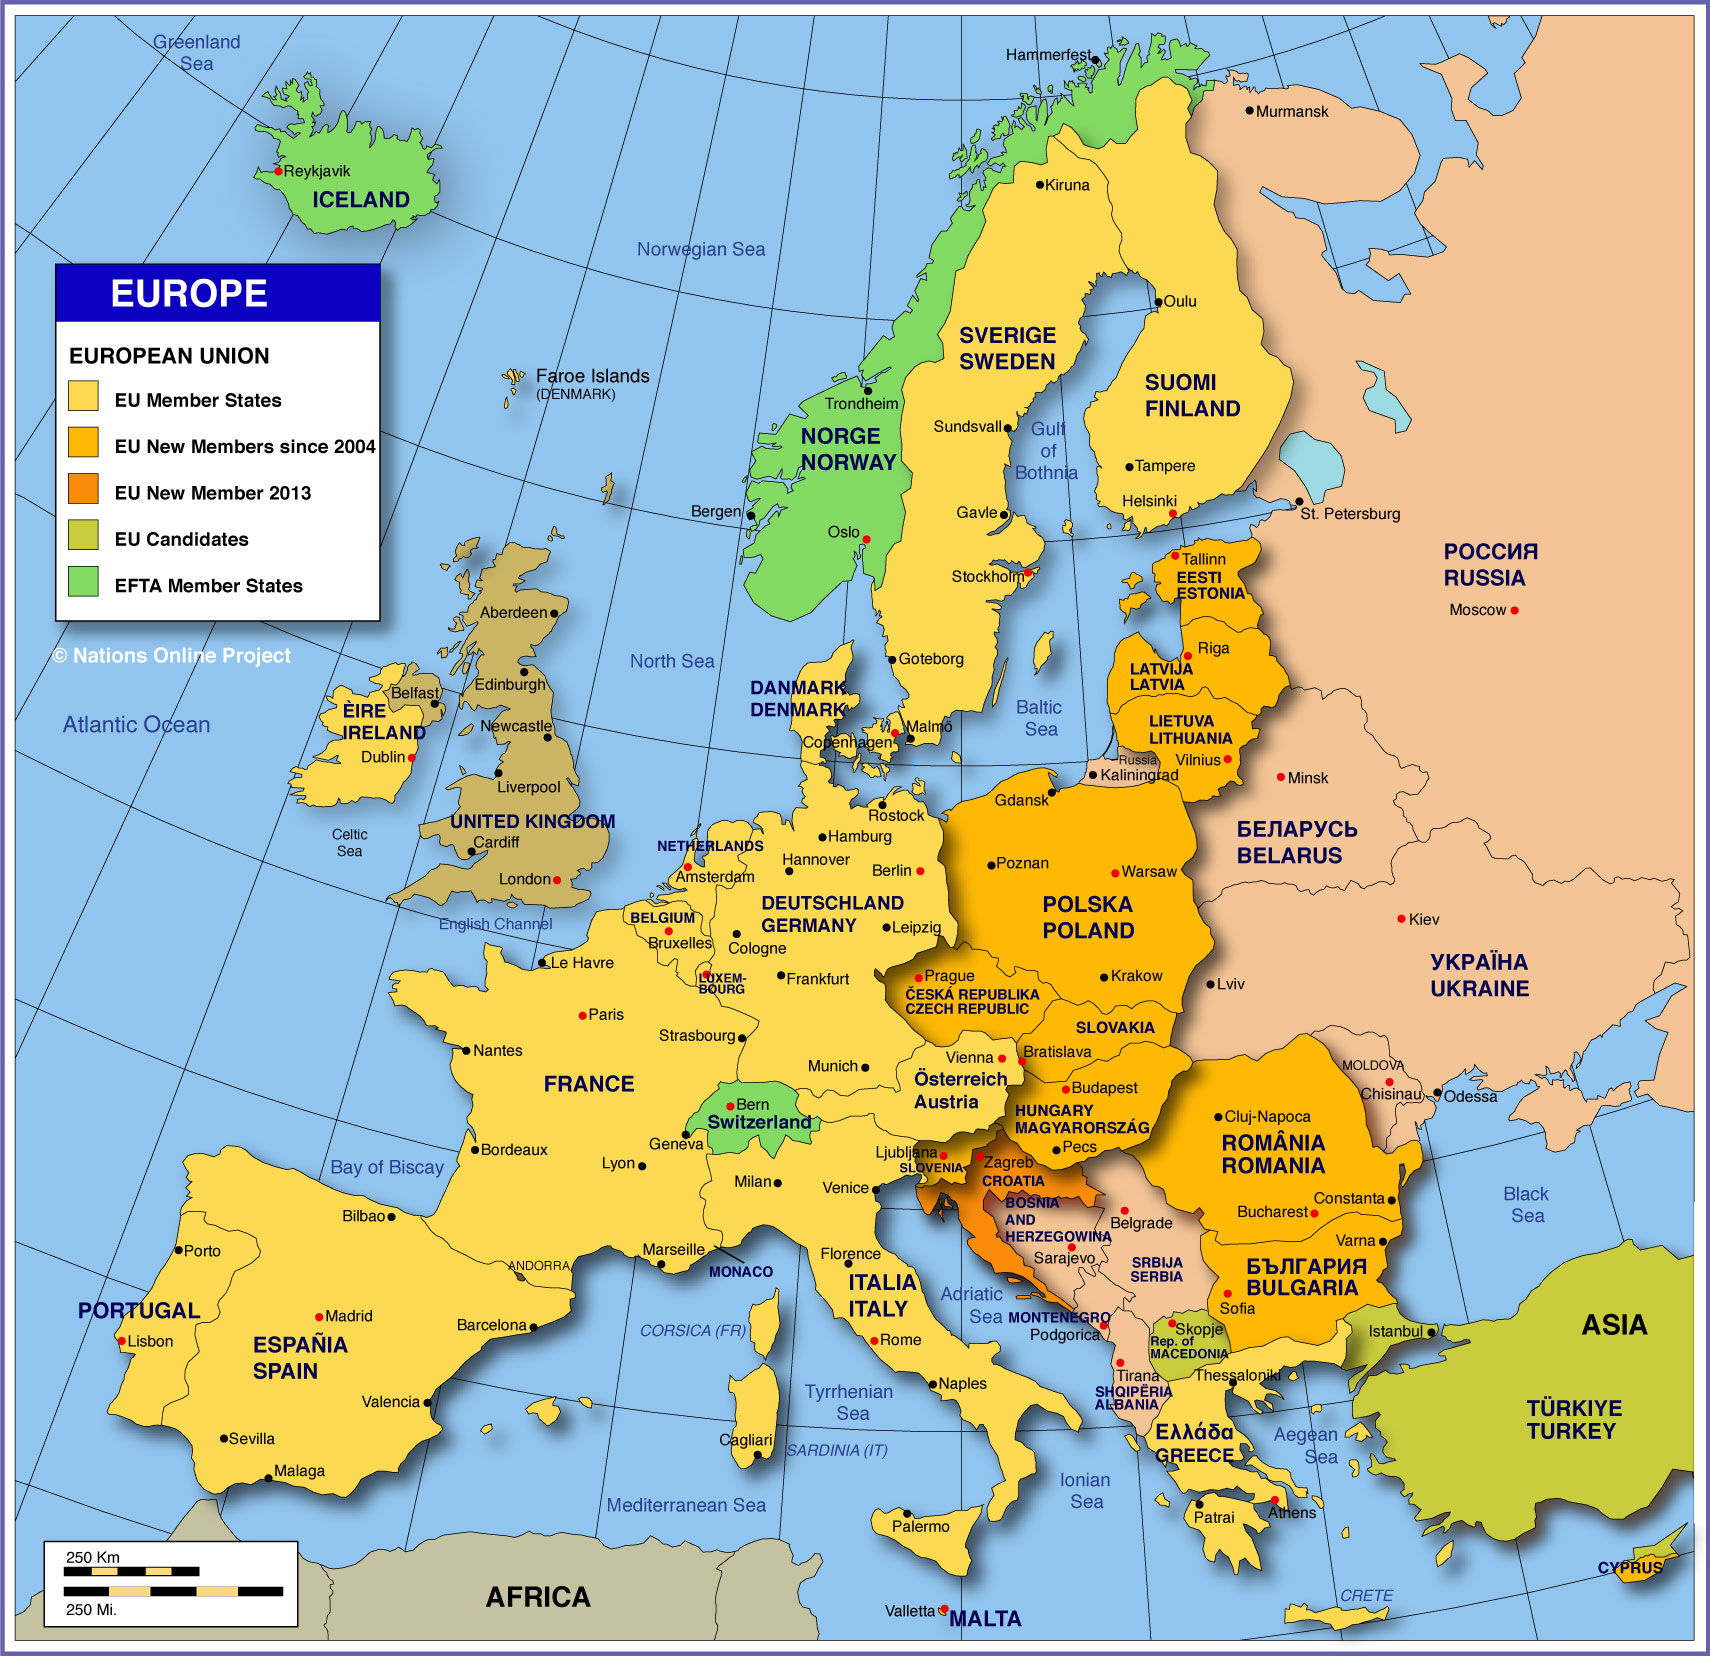 show me a map of europe Map Of Europe Member States Of The Eu Nations Online Project show me a map of europe